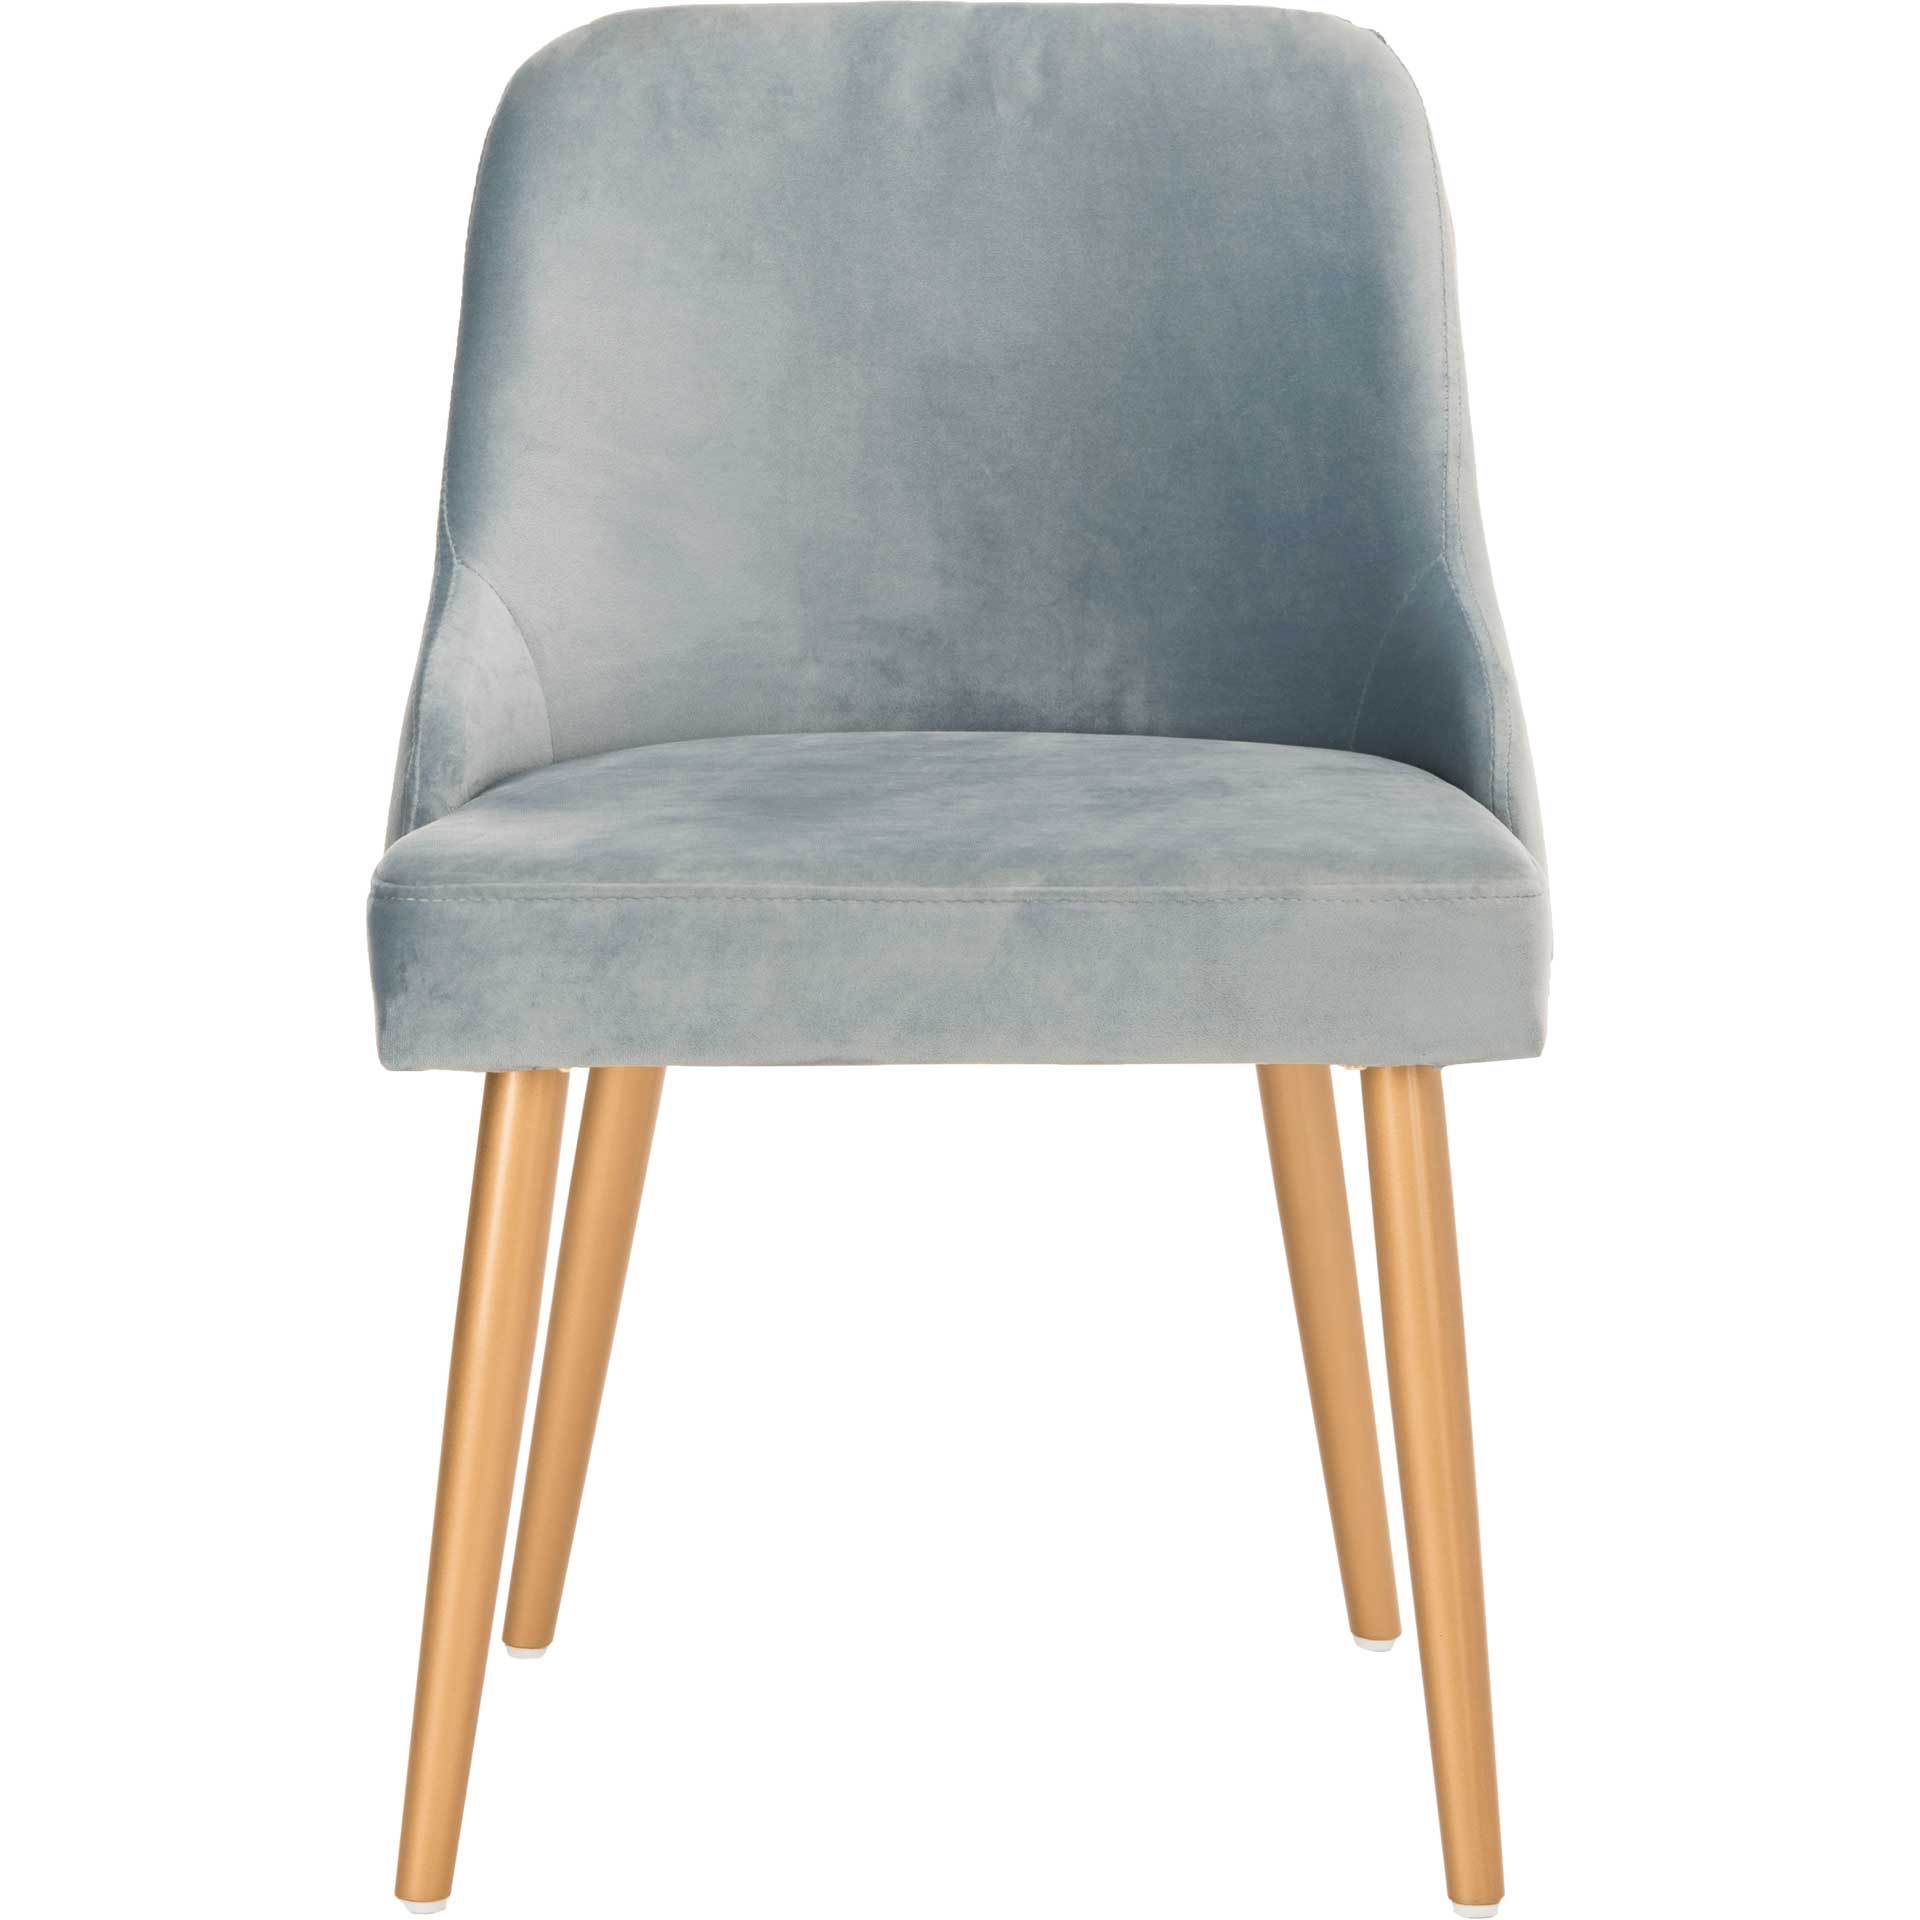 Luis Upholstered Dining Chair Slate Blue/Gold (Set of 2)